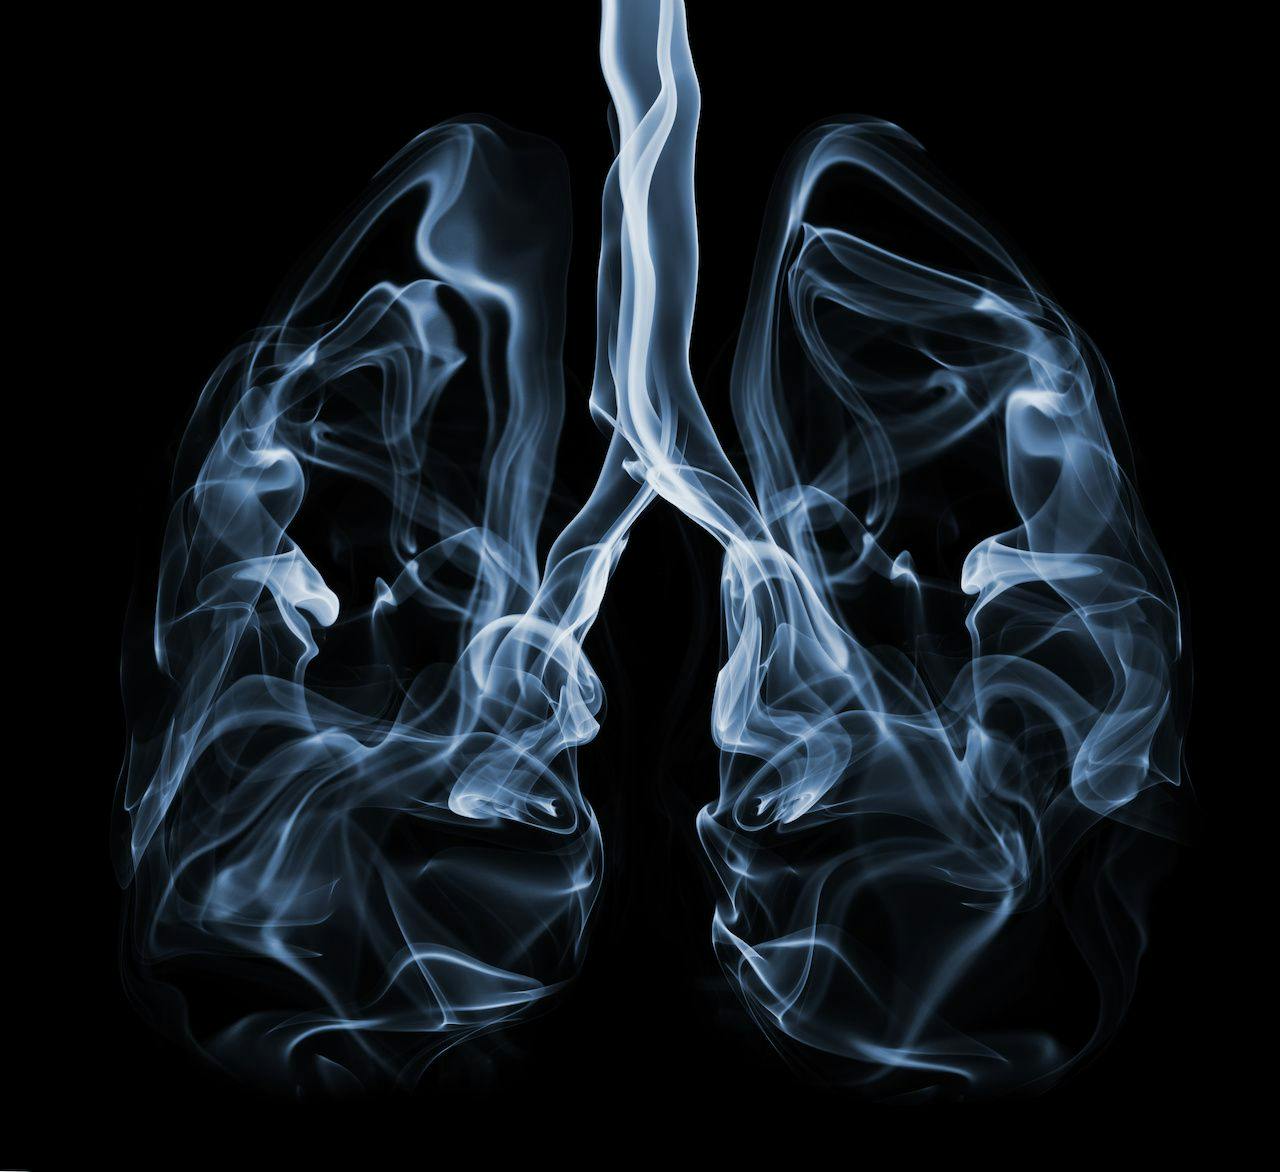 Electronic Cigarettes May Cause Same Lung Injuries, Respiratory Changes as Classic Cigarettes